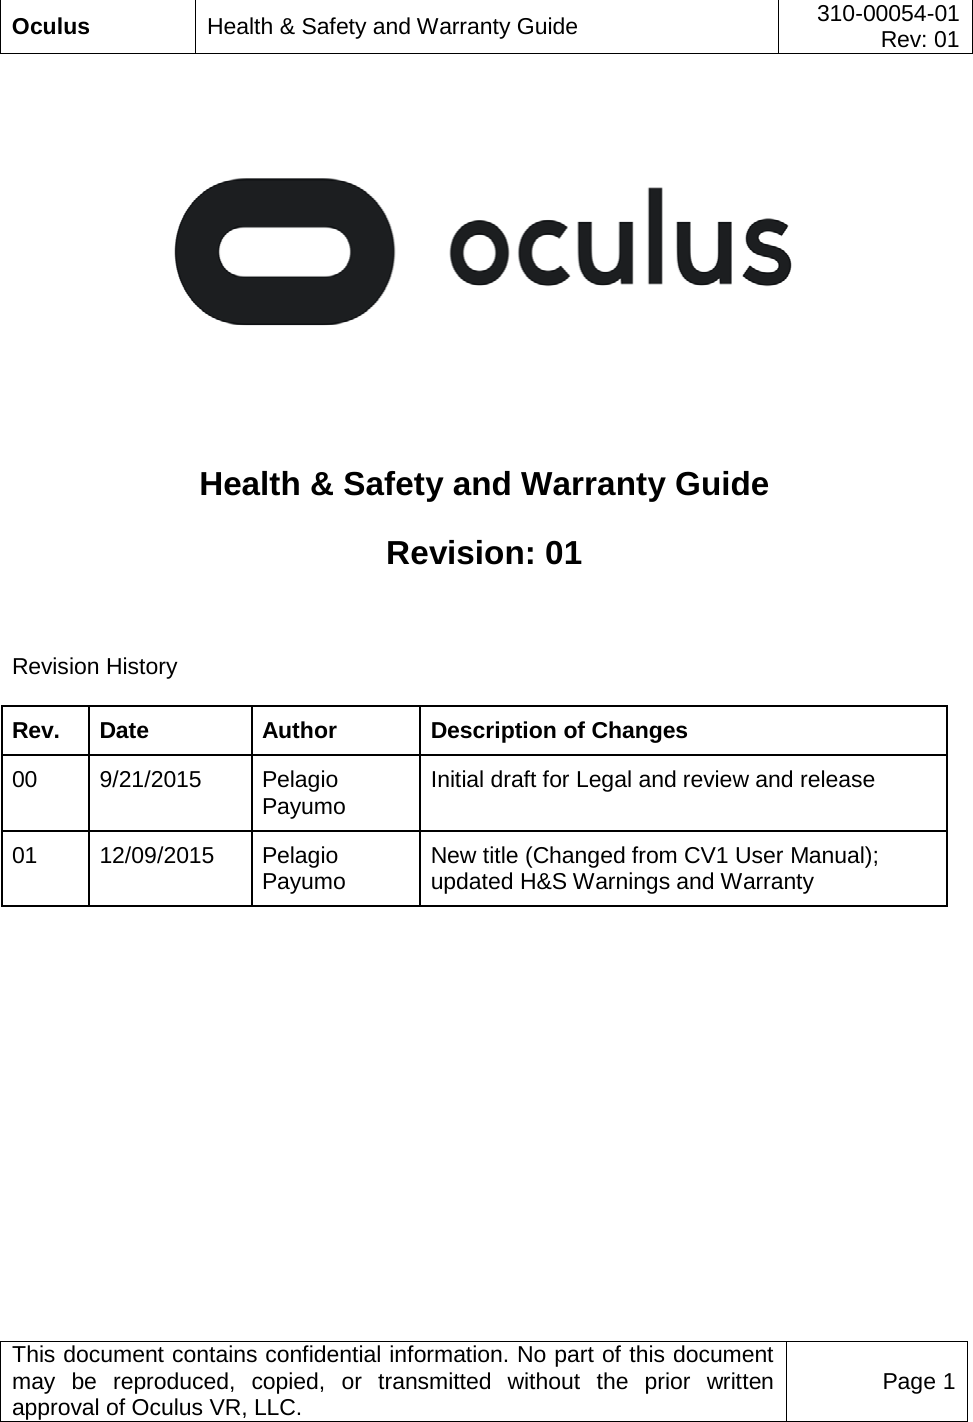  Oculus Health &amp; Safety and Warranty Guide 310-00054-01  Rev: 01   This document contains confidential information. No part of this document may be reproduced, copied, or transmitted without the prior written approval of Oculus VR, LLC. Page 1      Health &amp; Safety and Warranty Guide Revision: 01  Revision History Rev. Date Author Description of Changes 00 9/21/2015 Pelagio Payumo Initial draft for Legal and review and release 01 12/09/2015 Pelagio Payumo New title (Changed from CV1 User Manual); updated H&amp;S Warnings and Warranty    